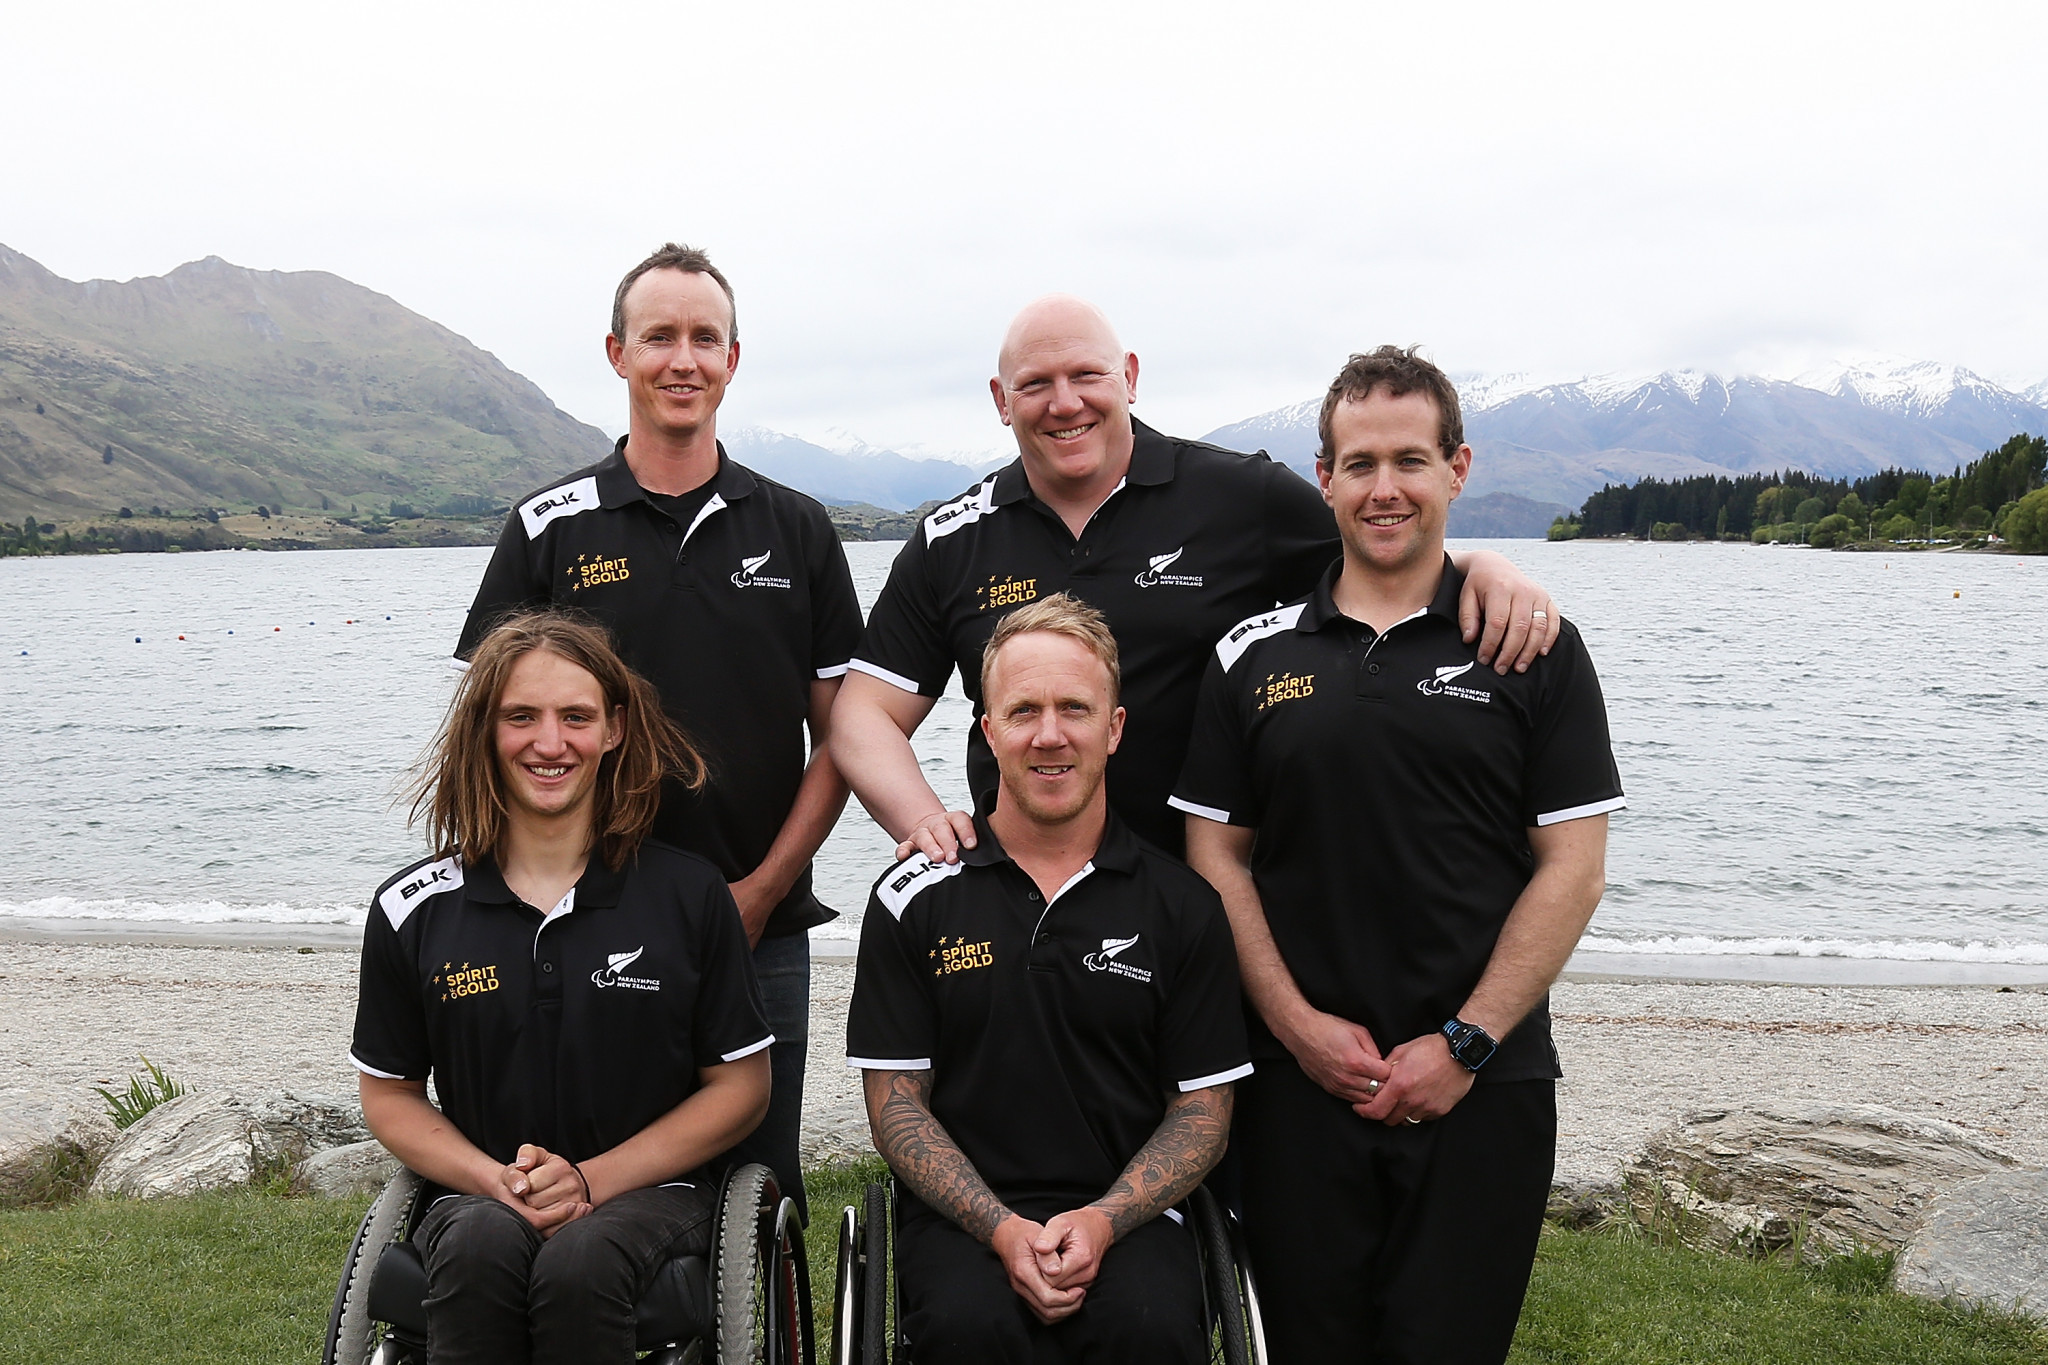 New Zealand Paralympic team at Pyeongchang 2018 to receive letters and video message from Disability Minister 